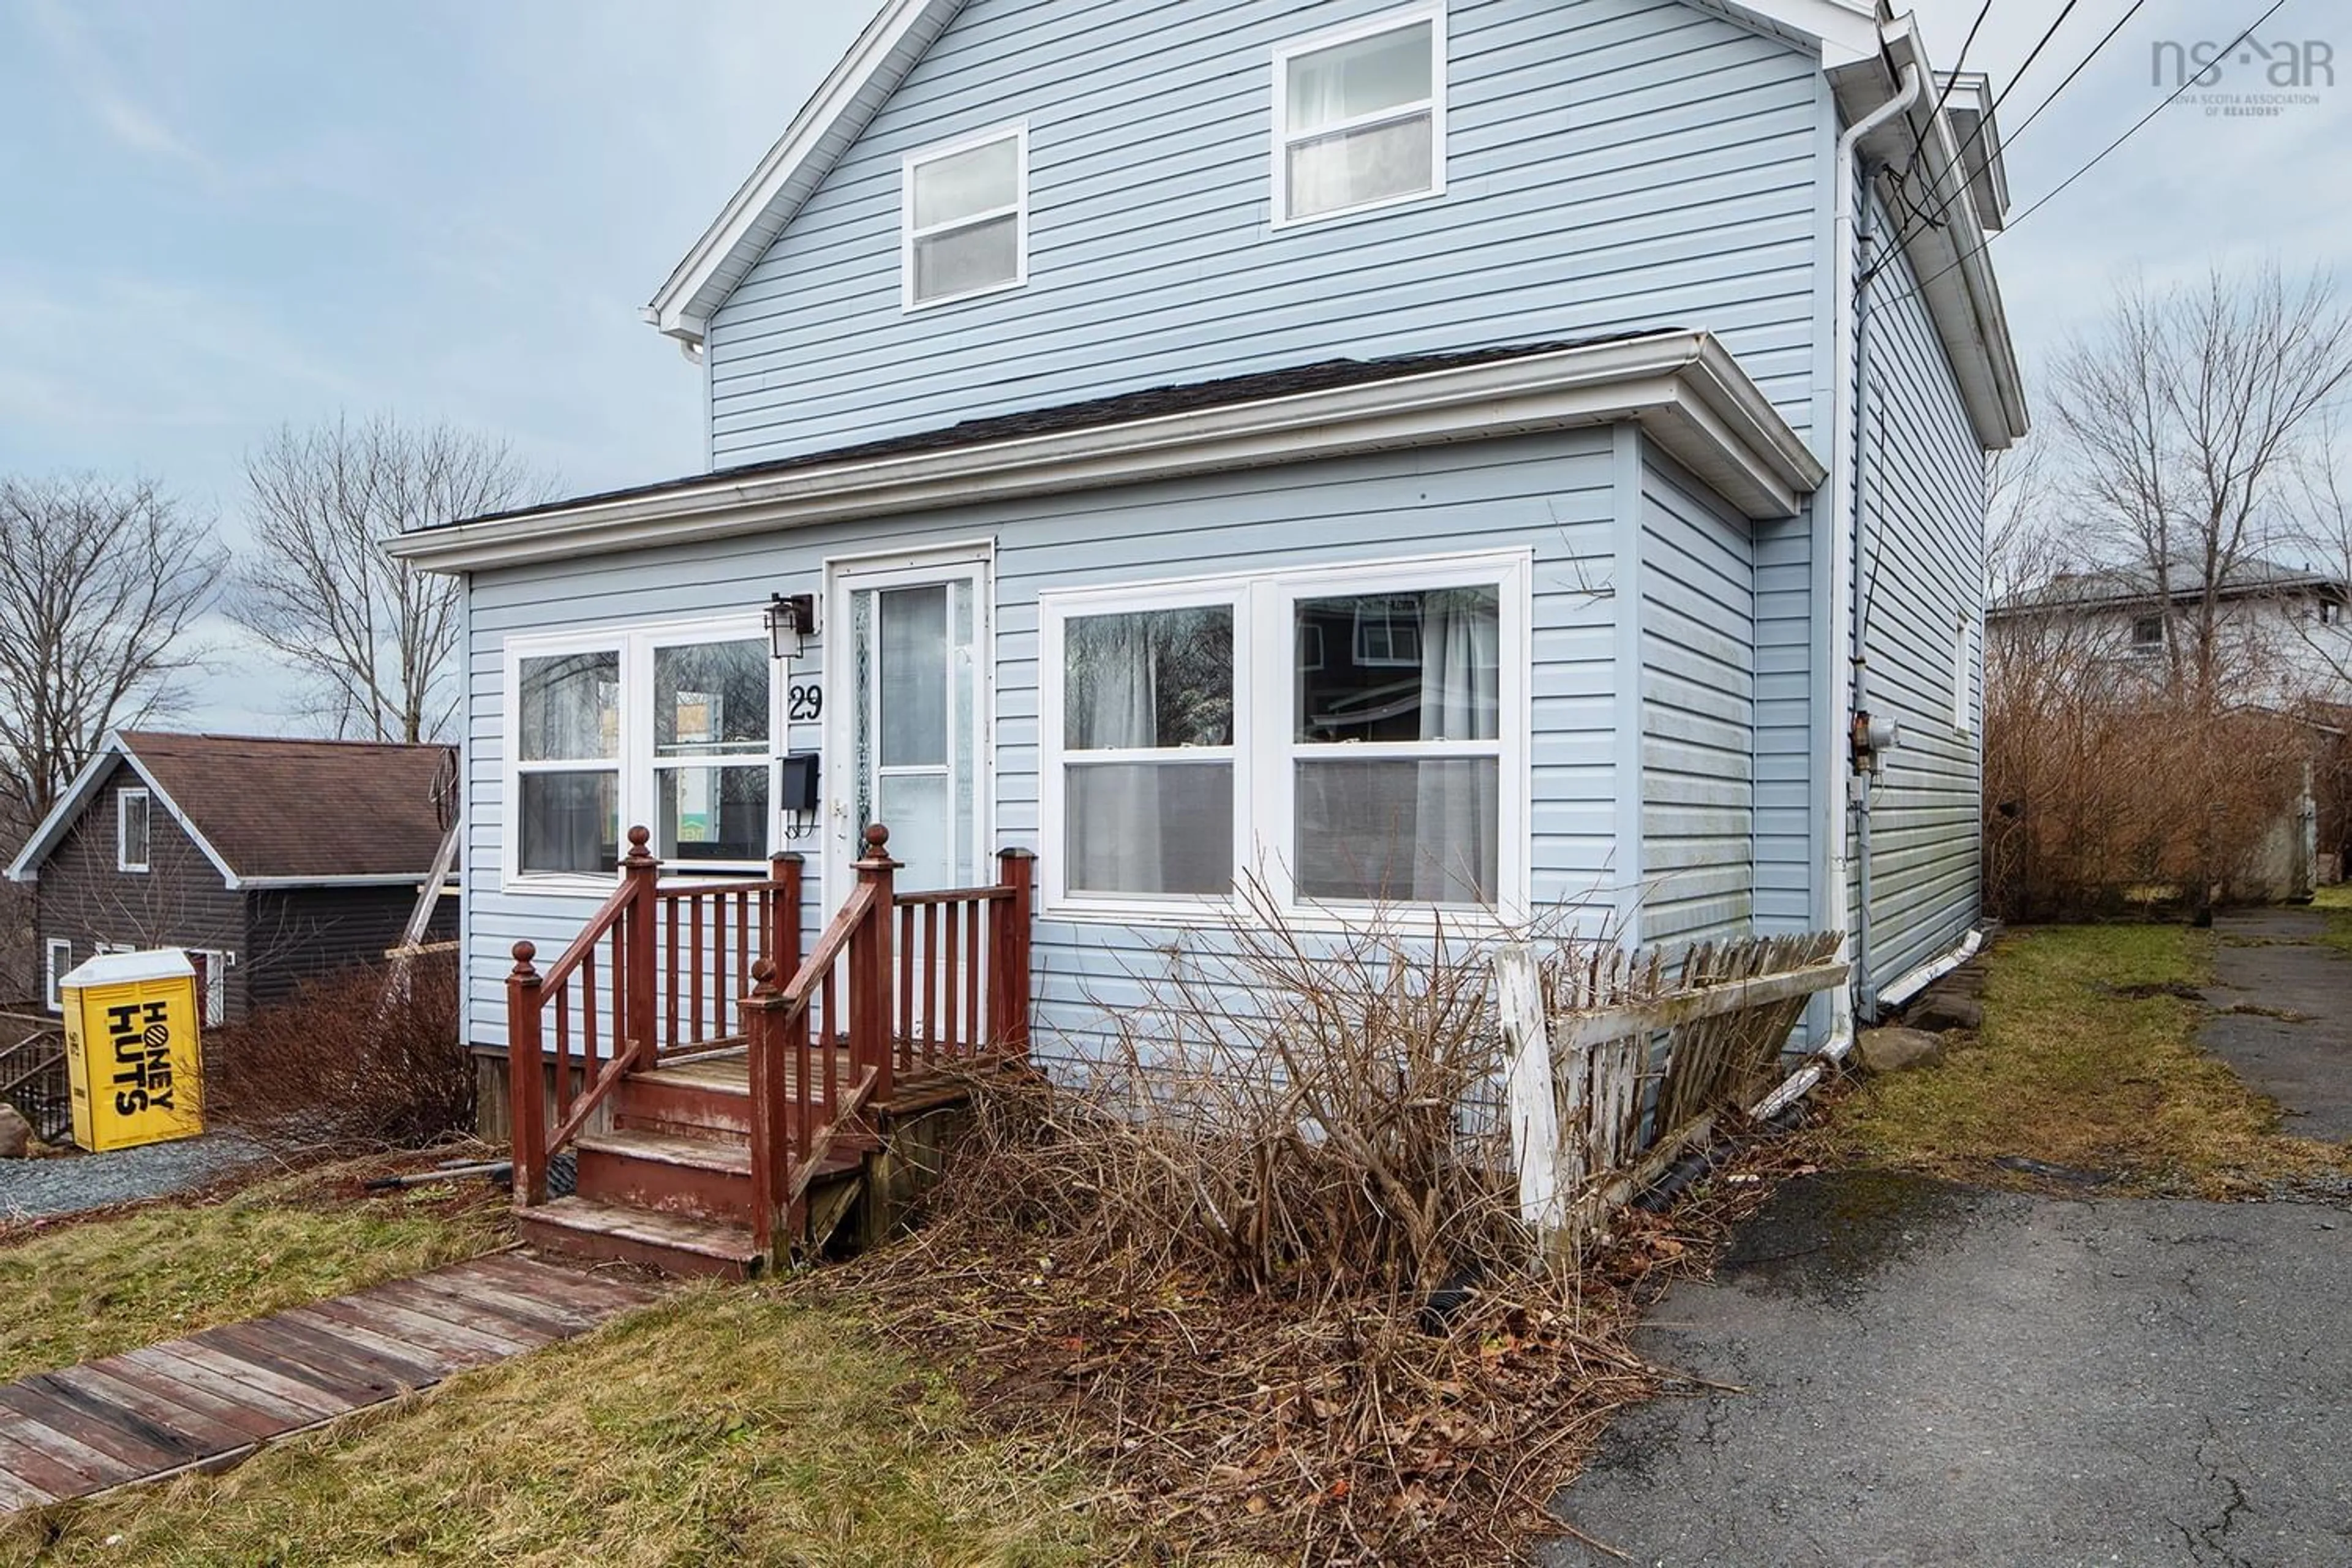 Home with unknown exterior material for 29 Marvin St, Dartmouth Nova Scotia B2Y 2L9